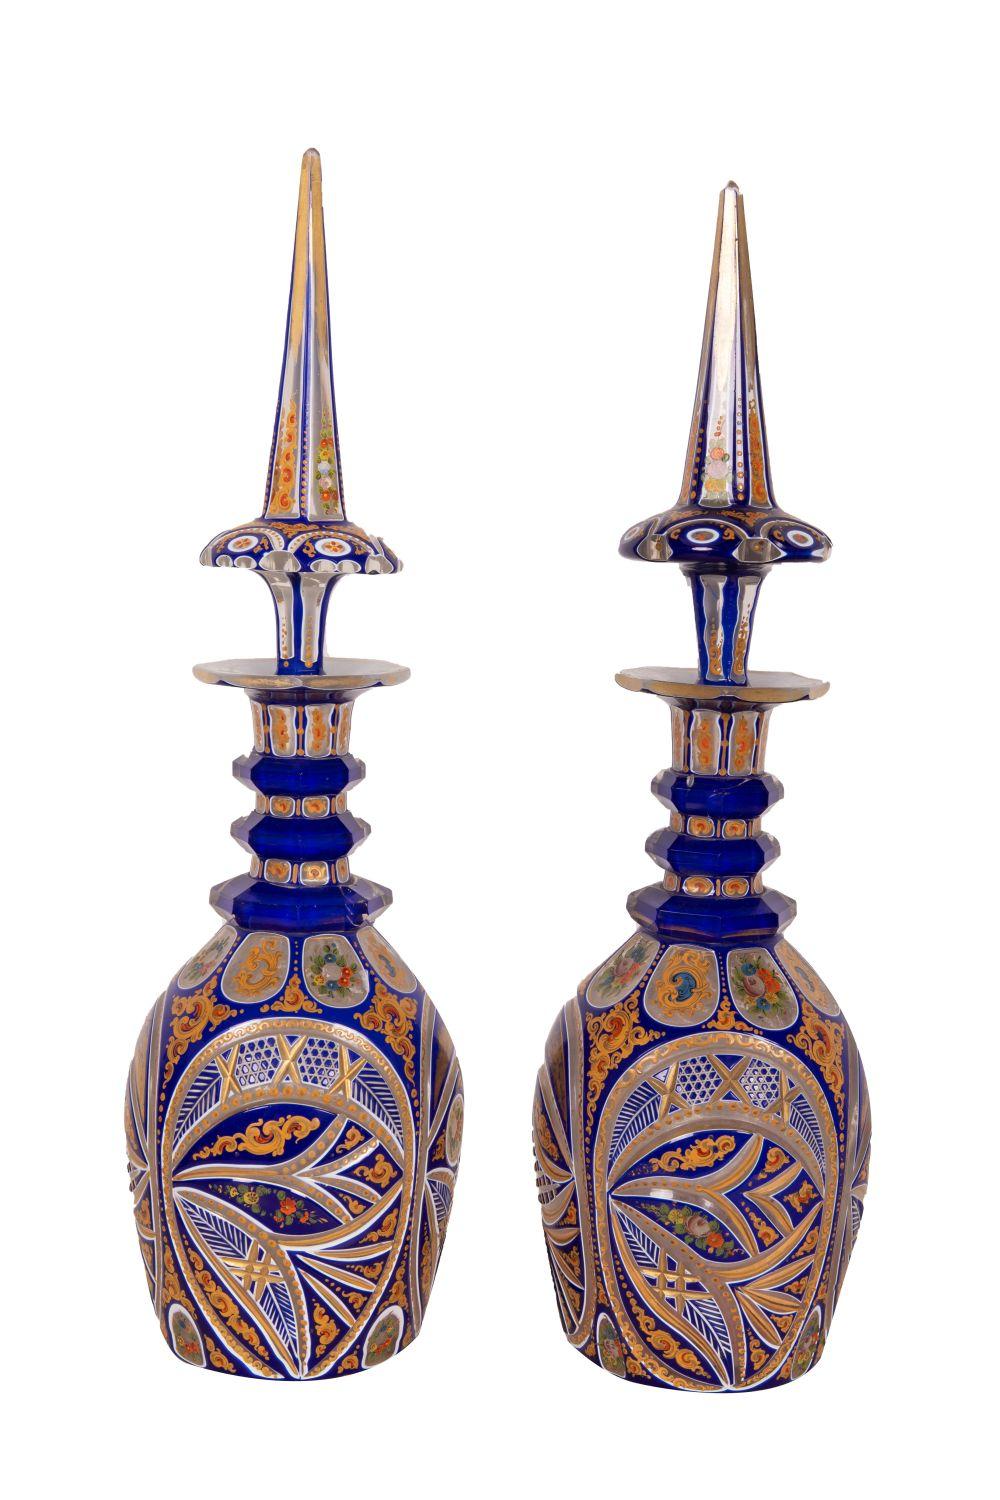 PAIR OF BOHEMIAN ETCHED & ENAMEL GLASS